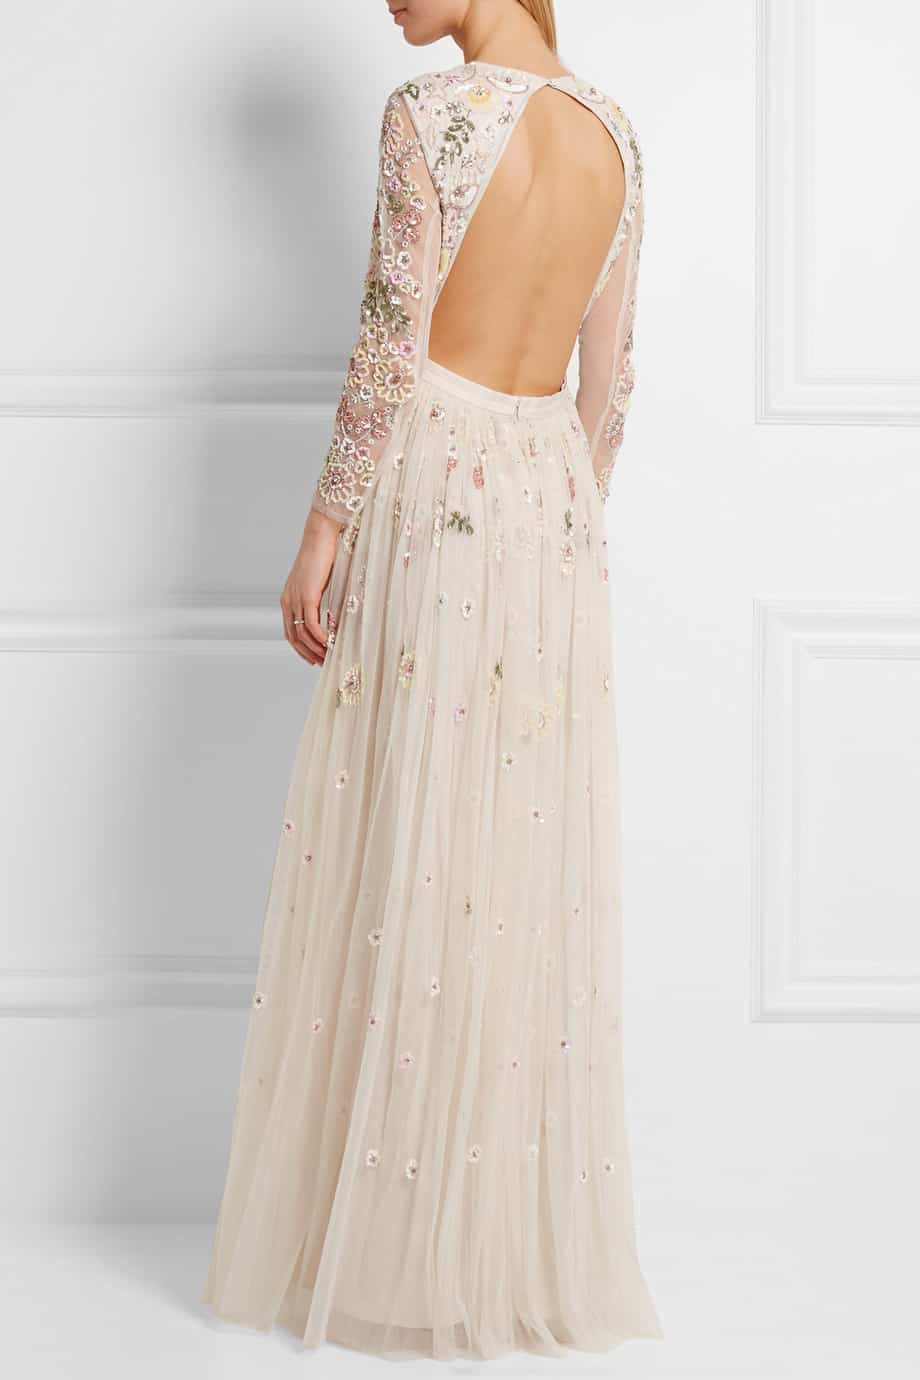 Top wedding dresses under $1000 - backless embellished gown by Needle & Thread